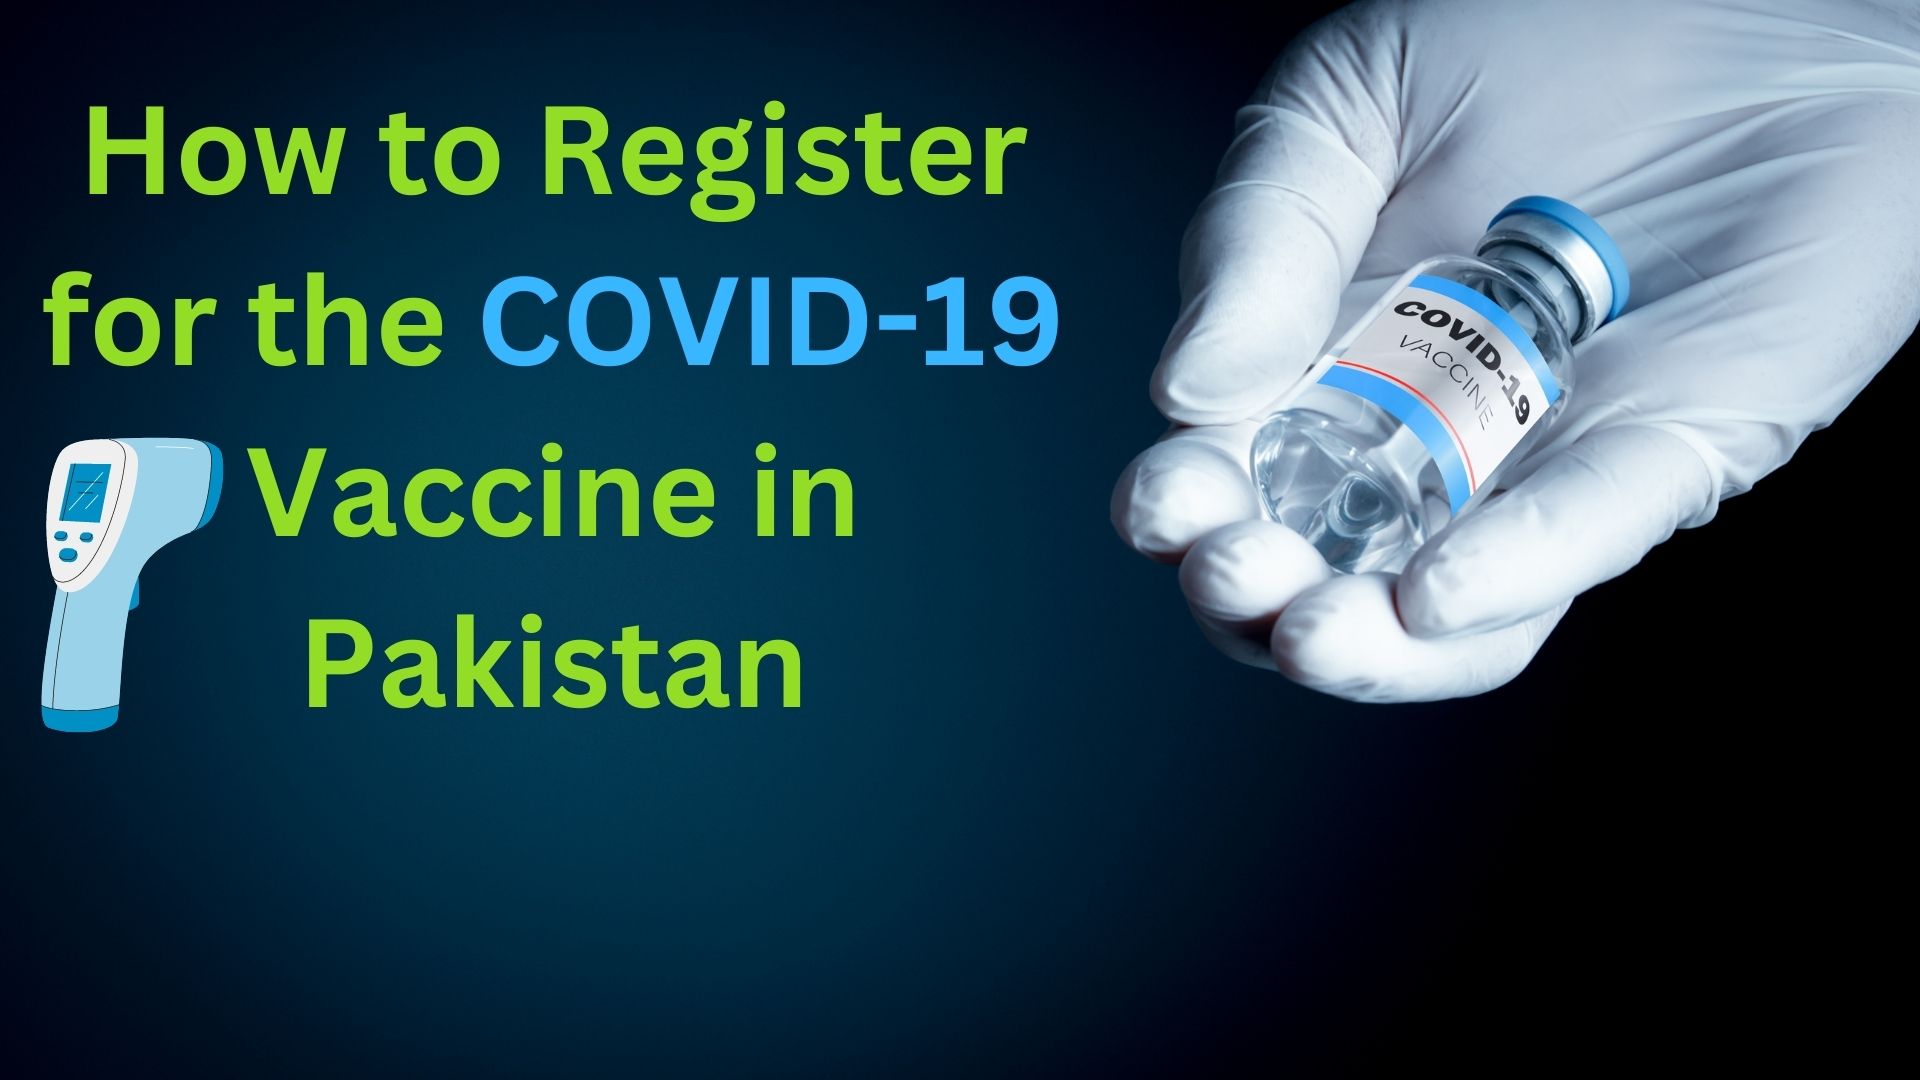 How to Register for the COVID-19 Vaccine in Pakistan